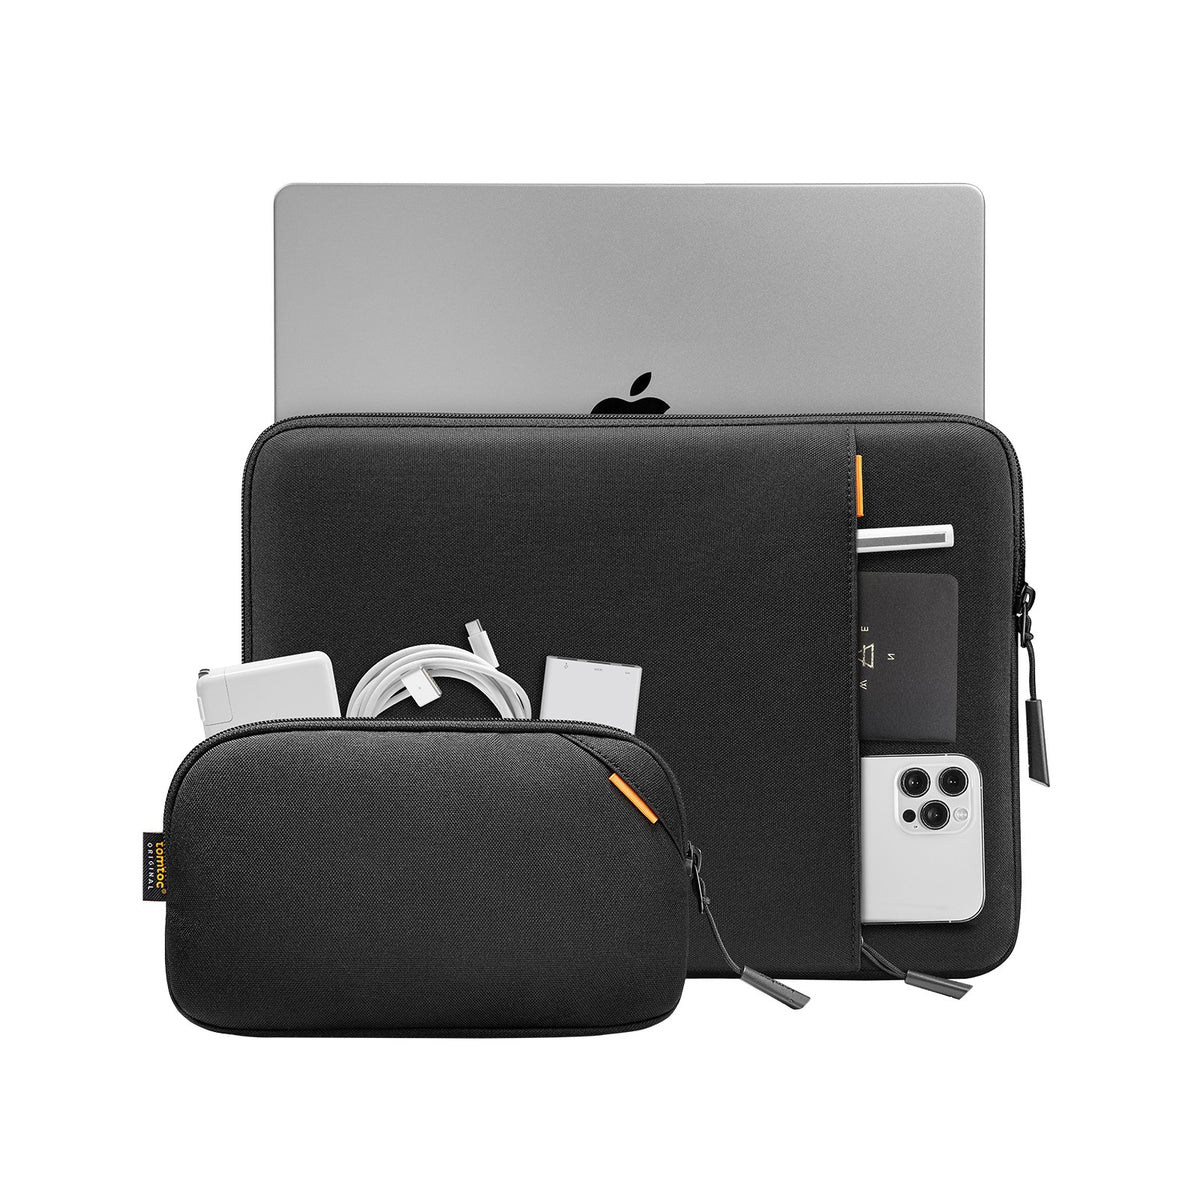 secondary_Defender-A13 Laptop Sleeve Kit for 13-inch MacBook